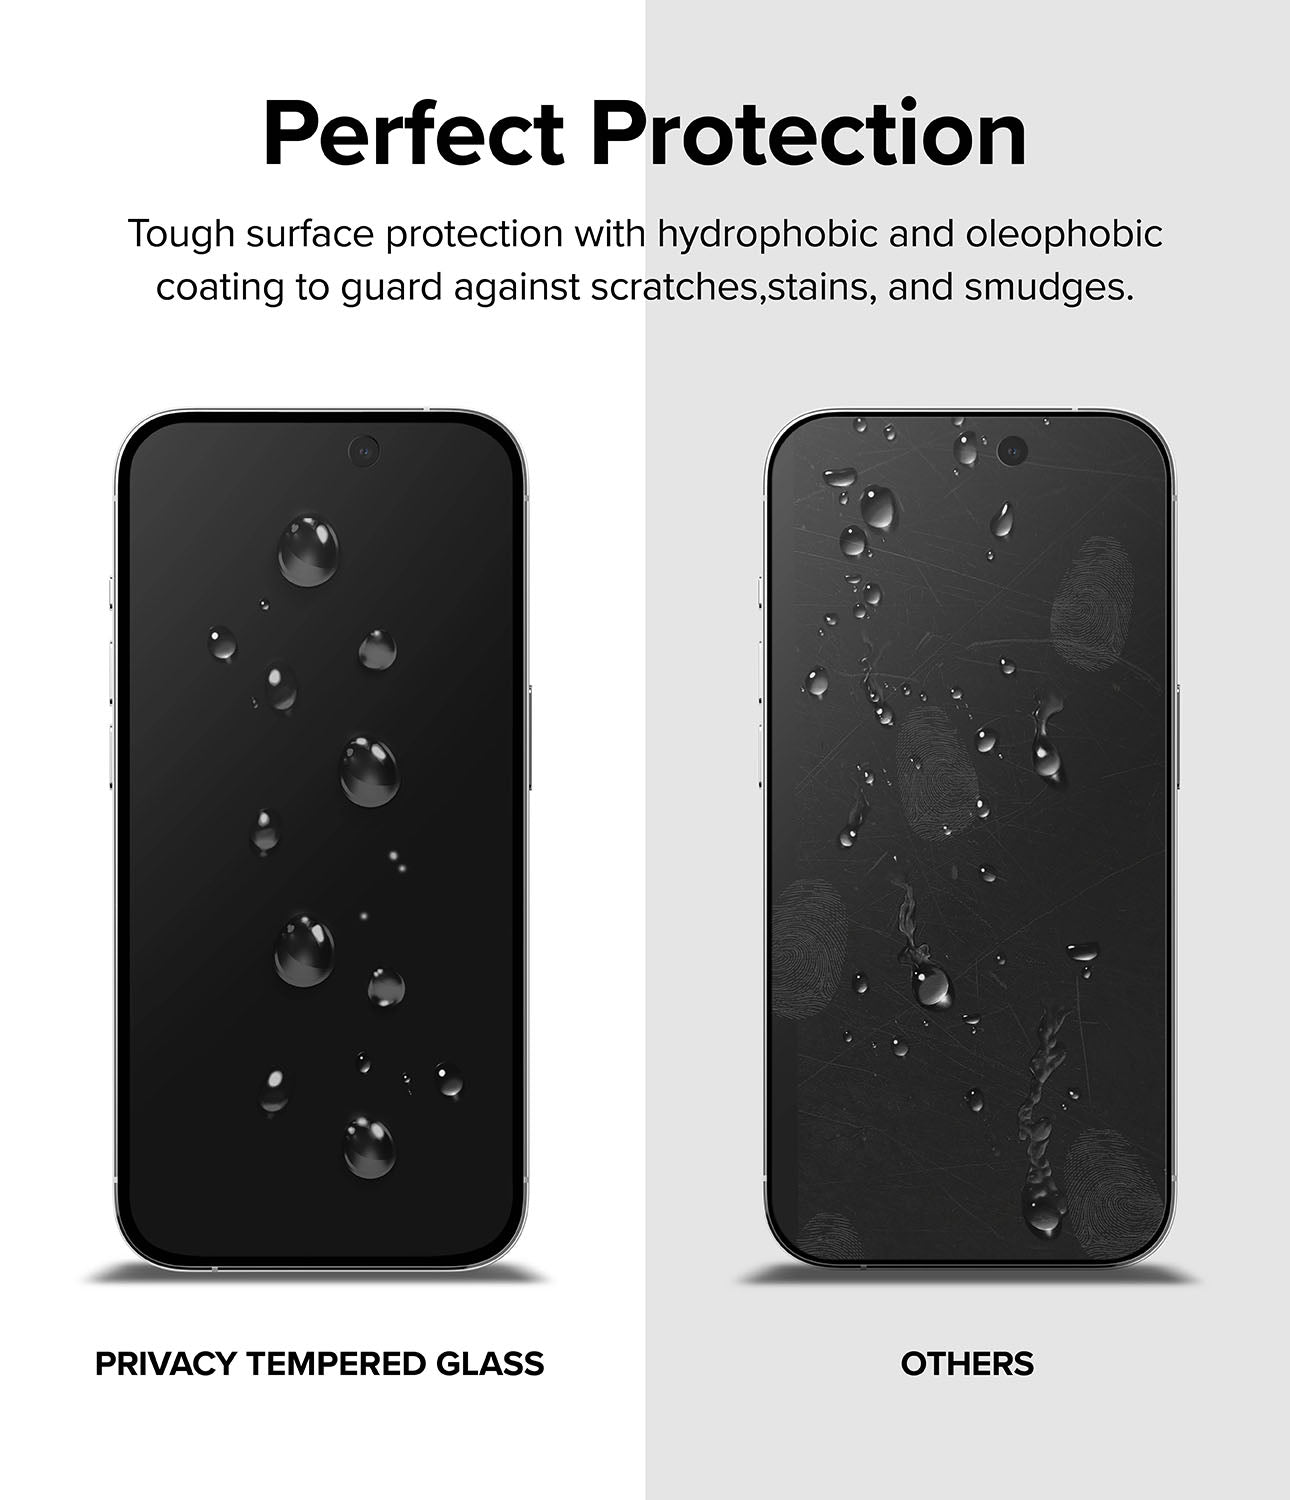 iPhone 15 Pro Screen Protector | Privacy Glass - Perfect Protection. Touch surface protection with hydrophobic and oleophobic coating to guard against scratches, stains, and smudges.